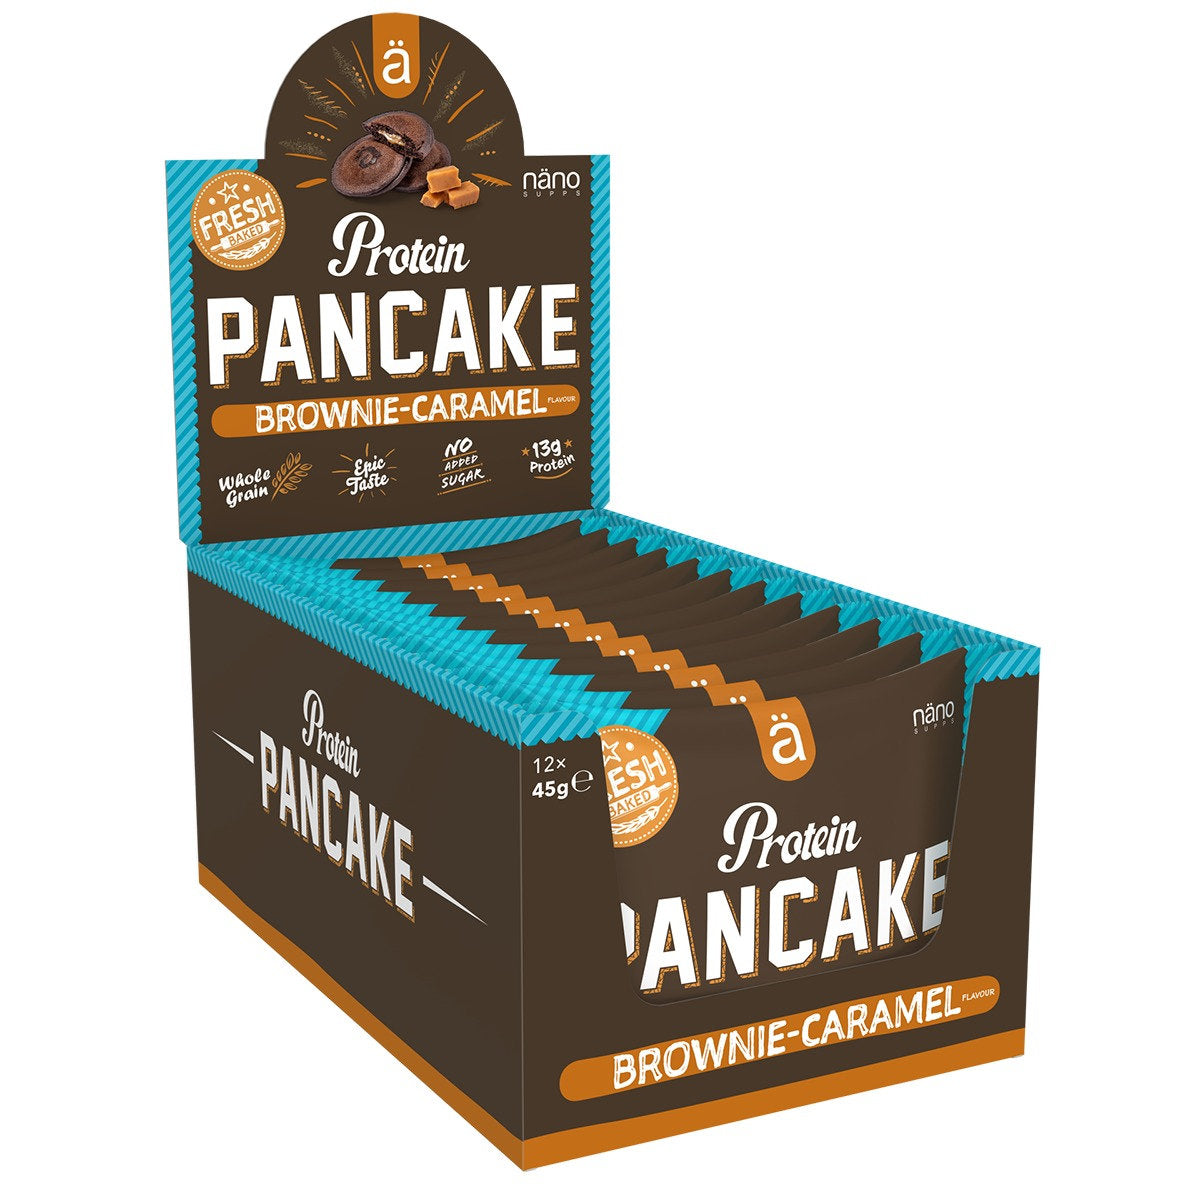 Nano Supplements Protein Pancake (Box of 12) Protein Snacks Brownie - Caramel BEST BY April 19, 2023 Nano Supplements